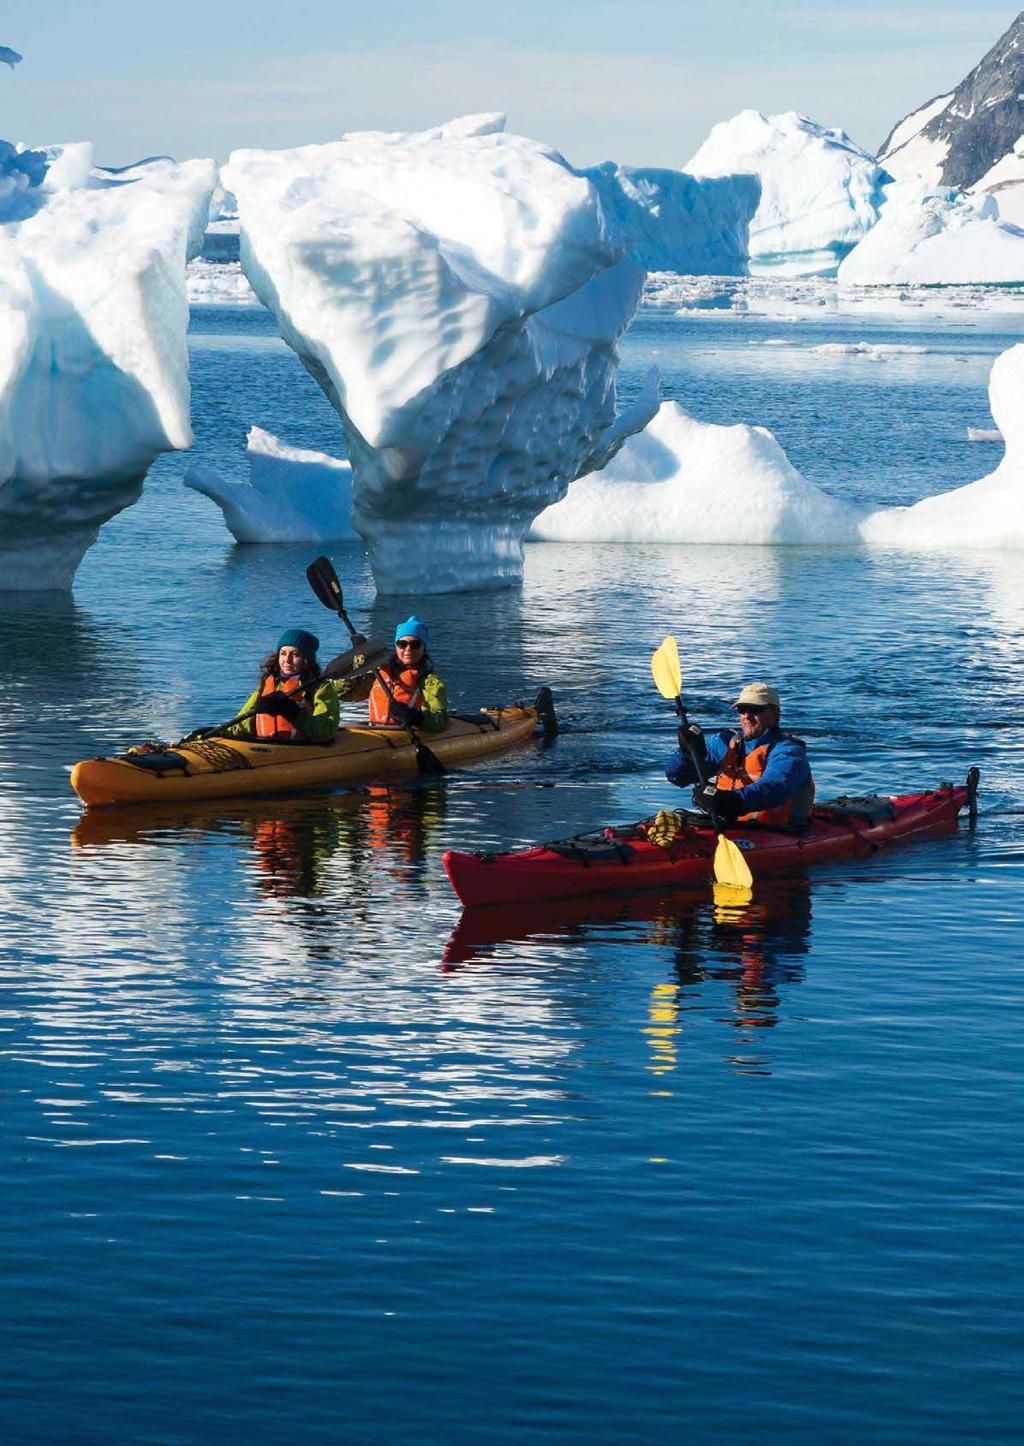 j Add more adventure! ANTARCTIC ADVENTURE ACTIVITIES Every day is an adventure in Antarctica, but even more so if you follow your passion and participate in an activity that you love.